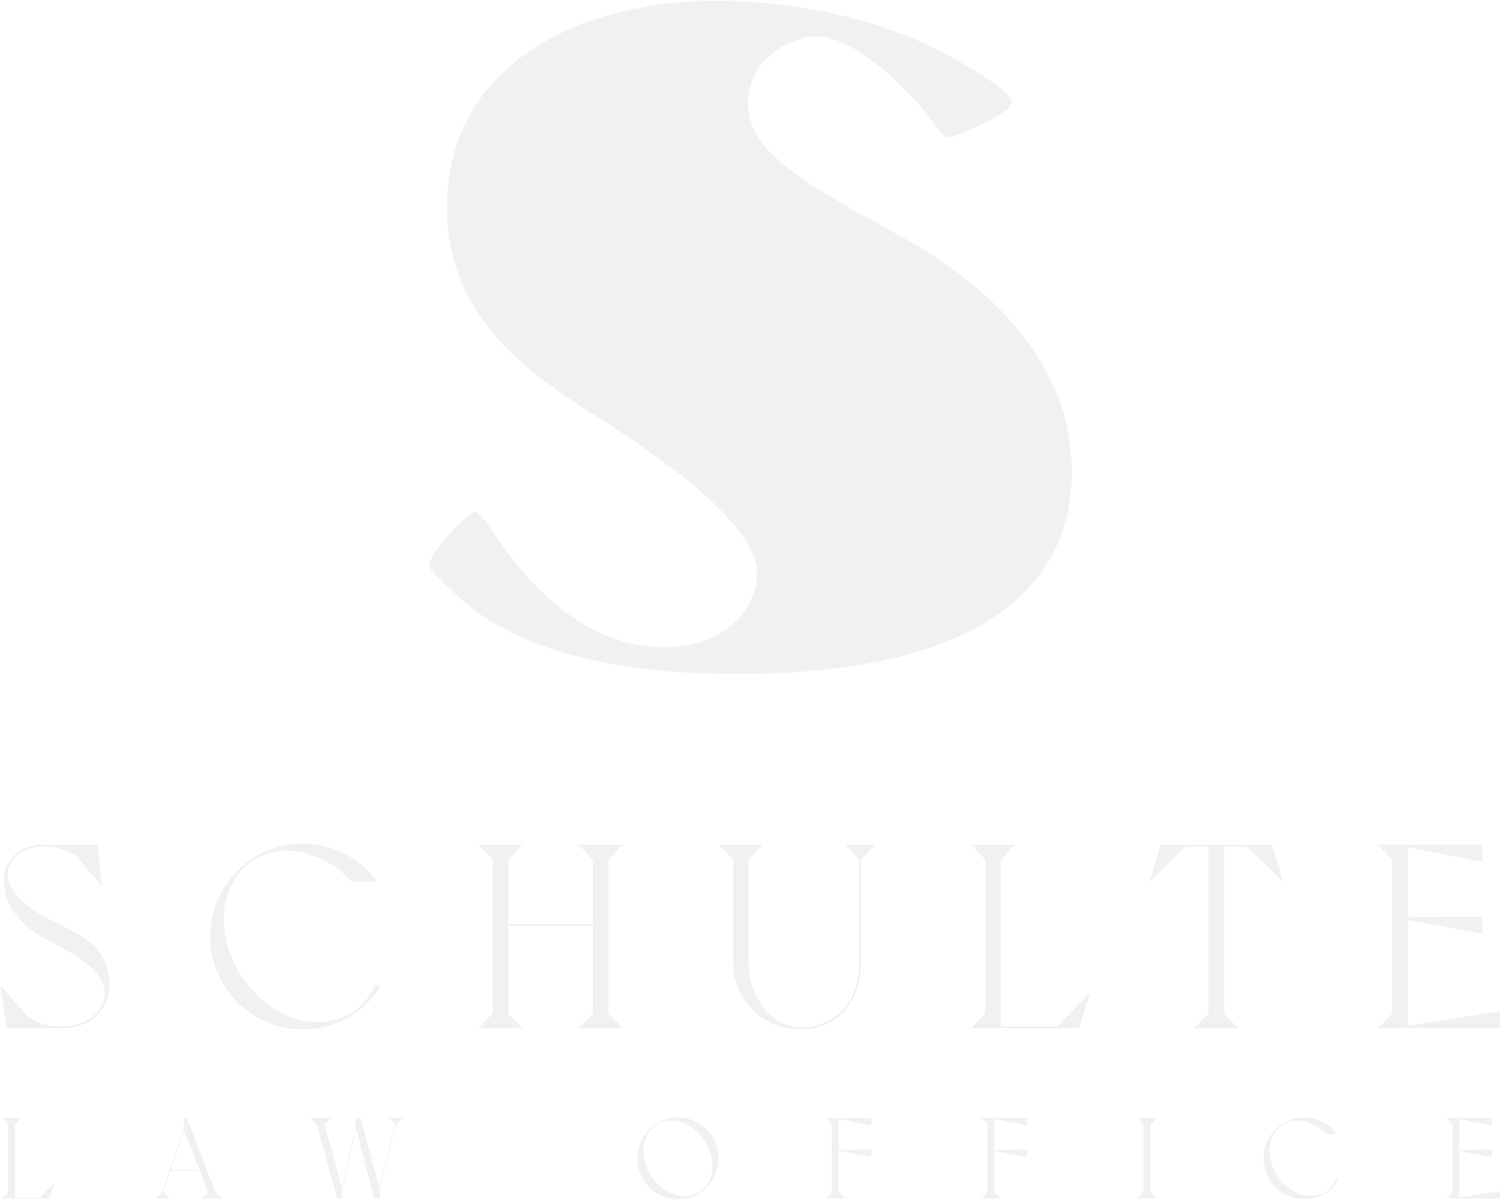 Schulte Law Office